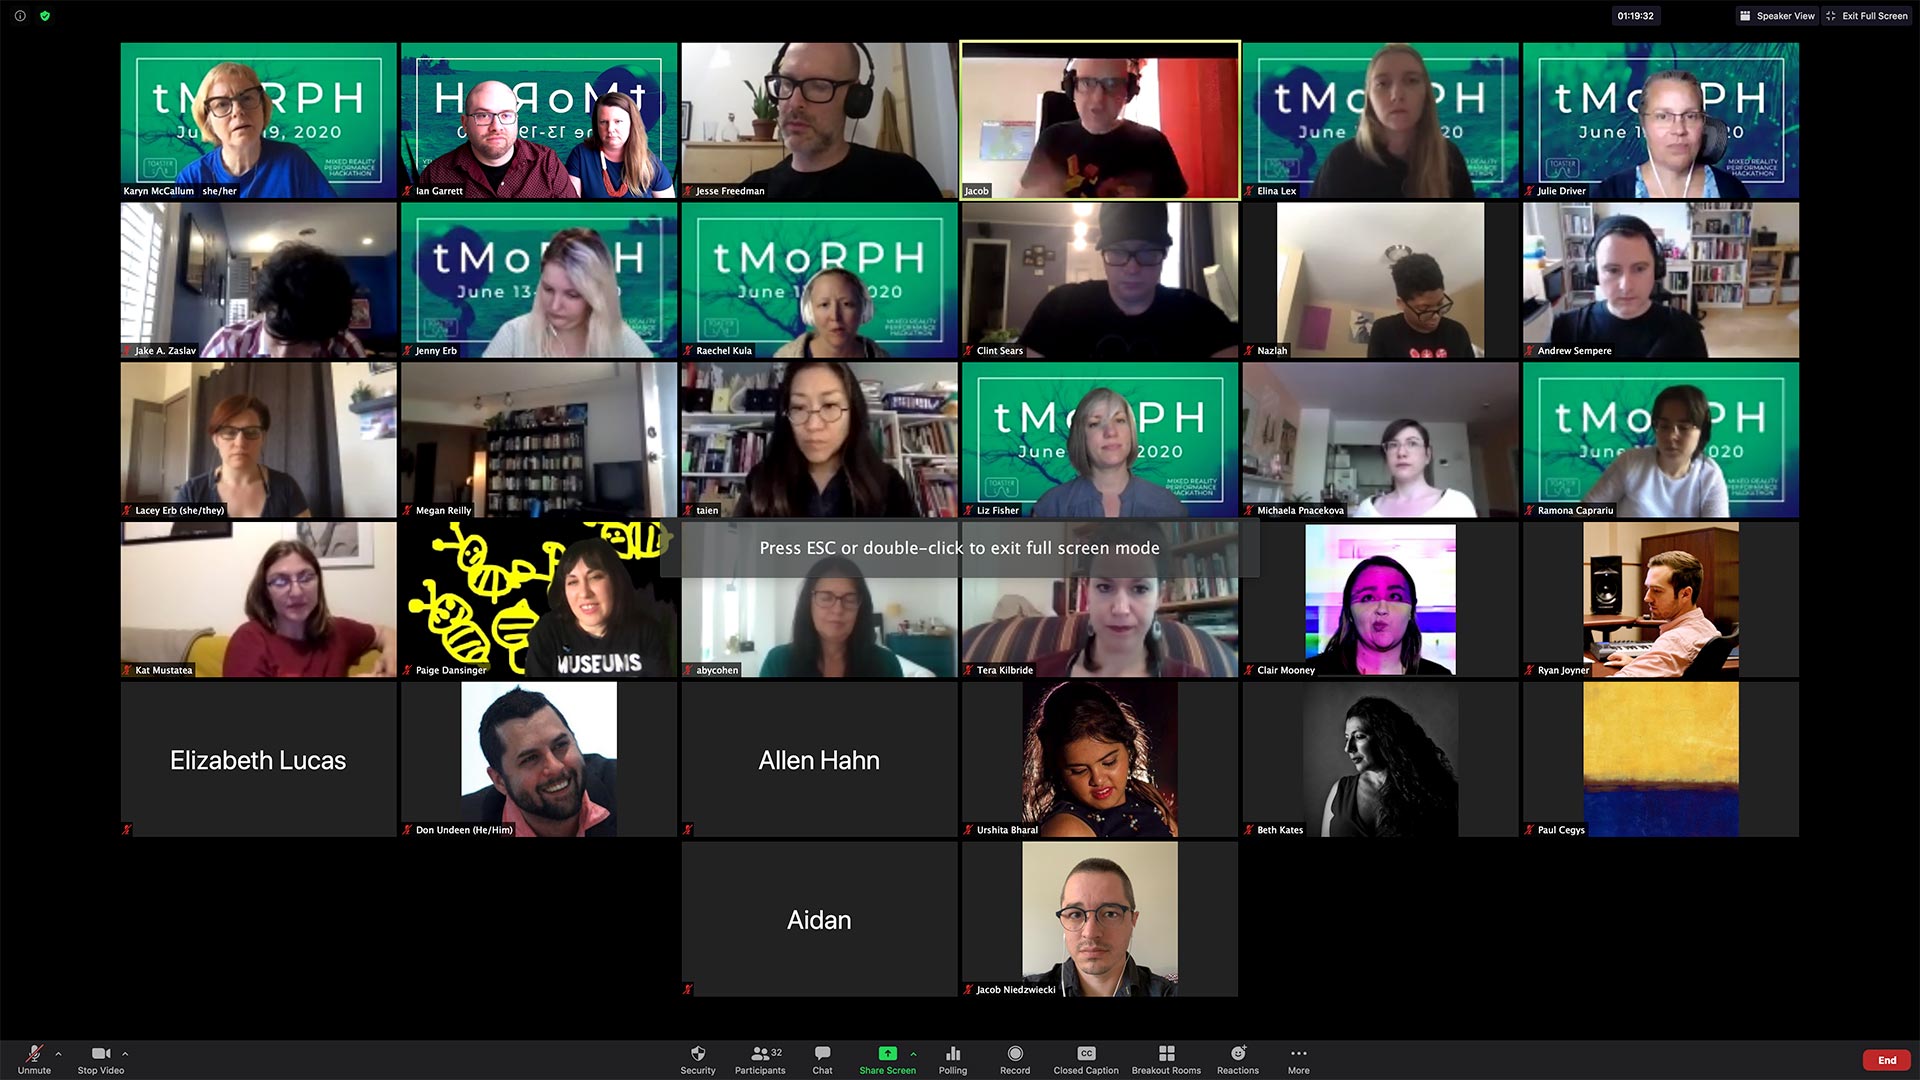 Screen shot of participants in a Zoom meeting session, some with tMoRPH branded backgrounds, some with video disabled.